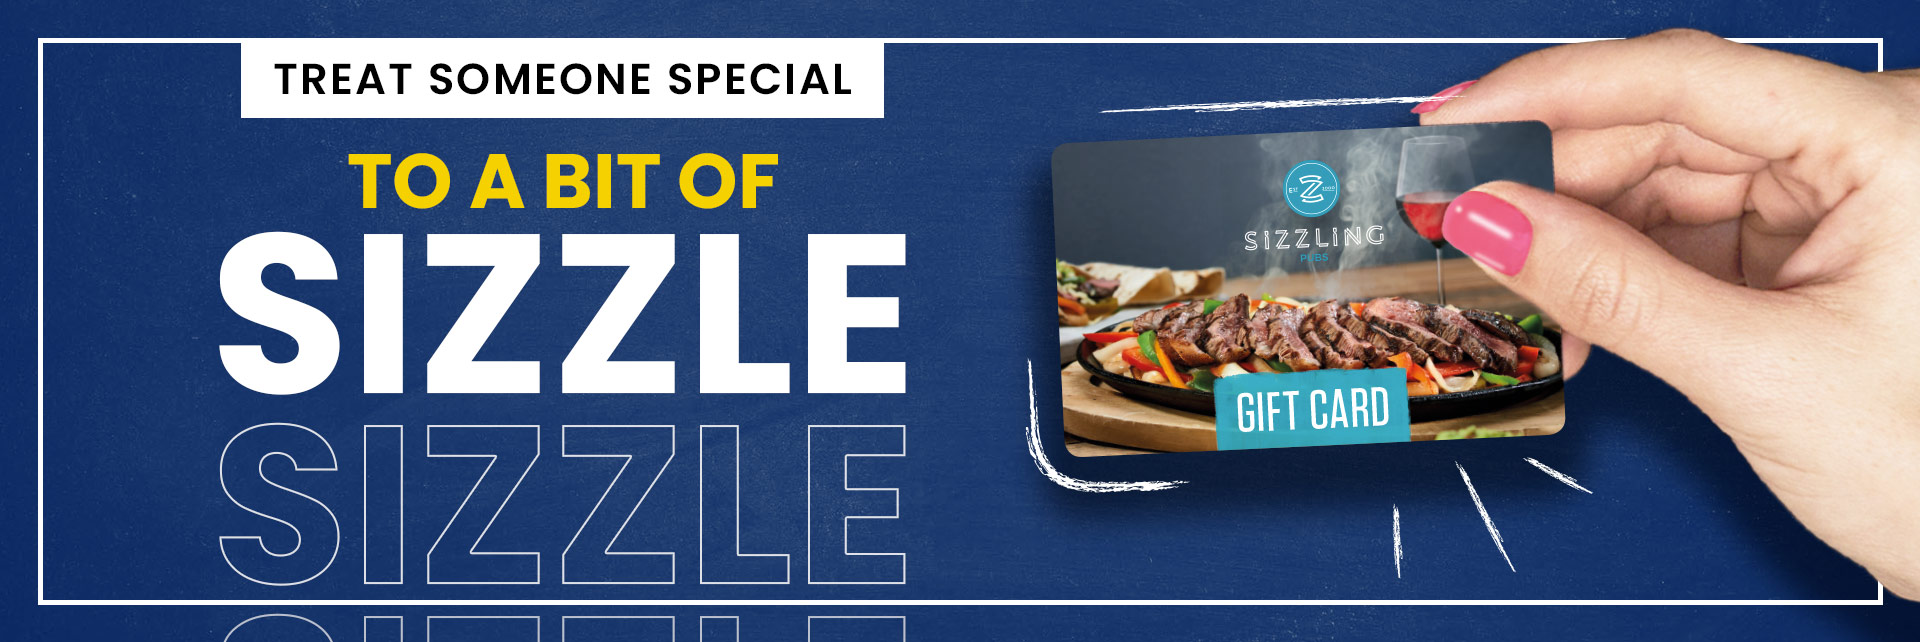 Sizzling Pubs Gift Card at The Briars in Kettering